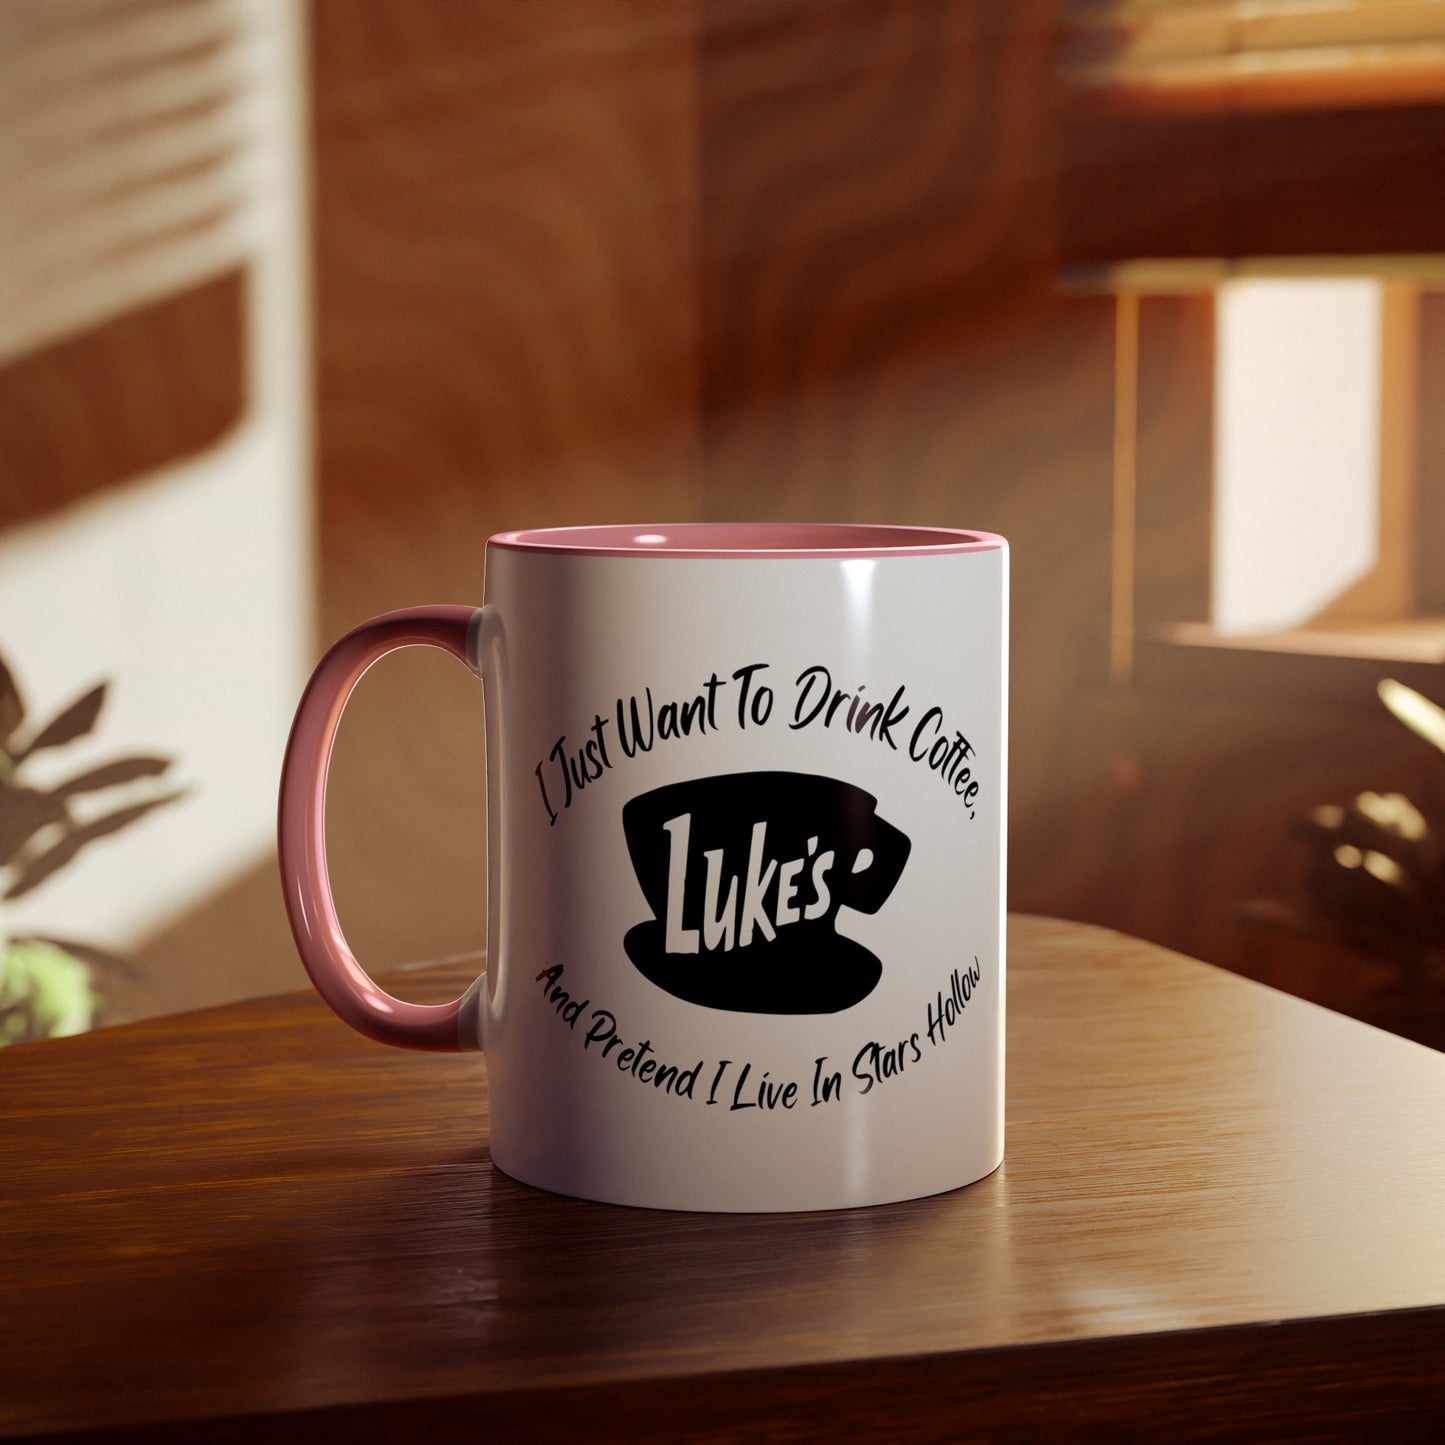 I Just Want To Live In Stars Hollow / Gilmore Girls Mug